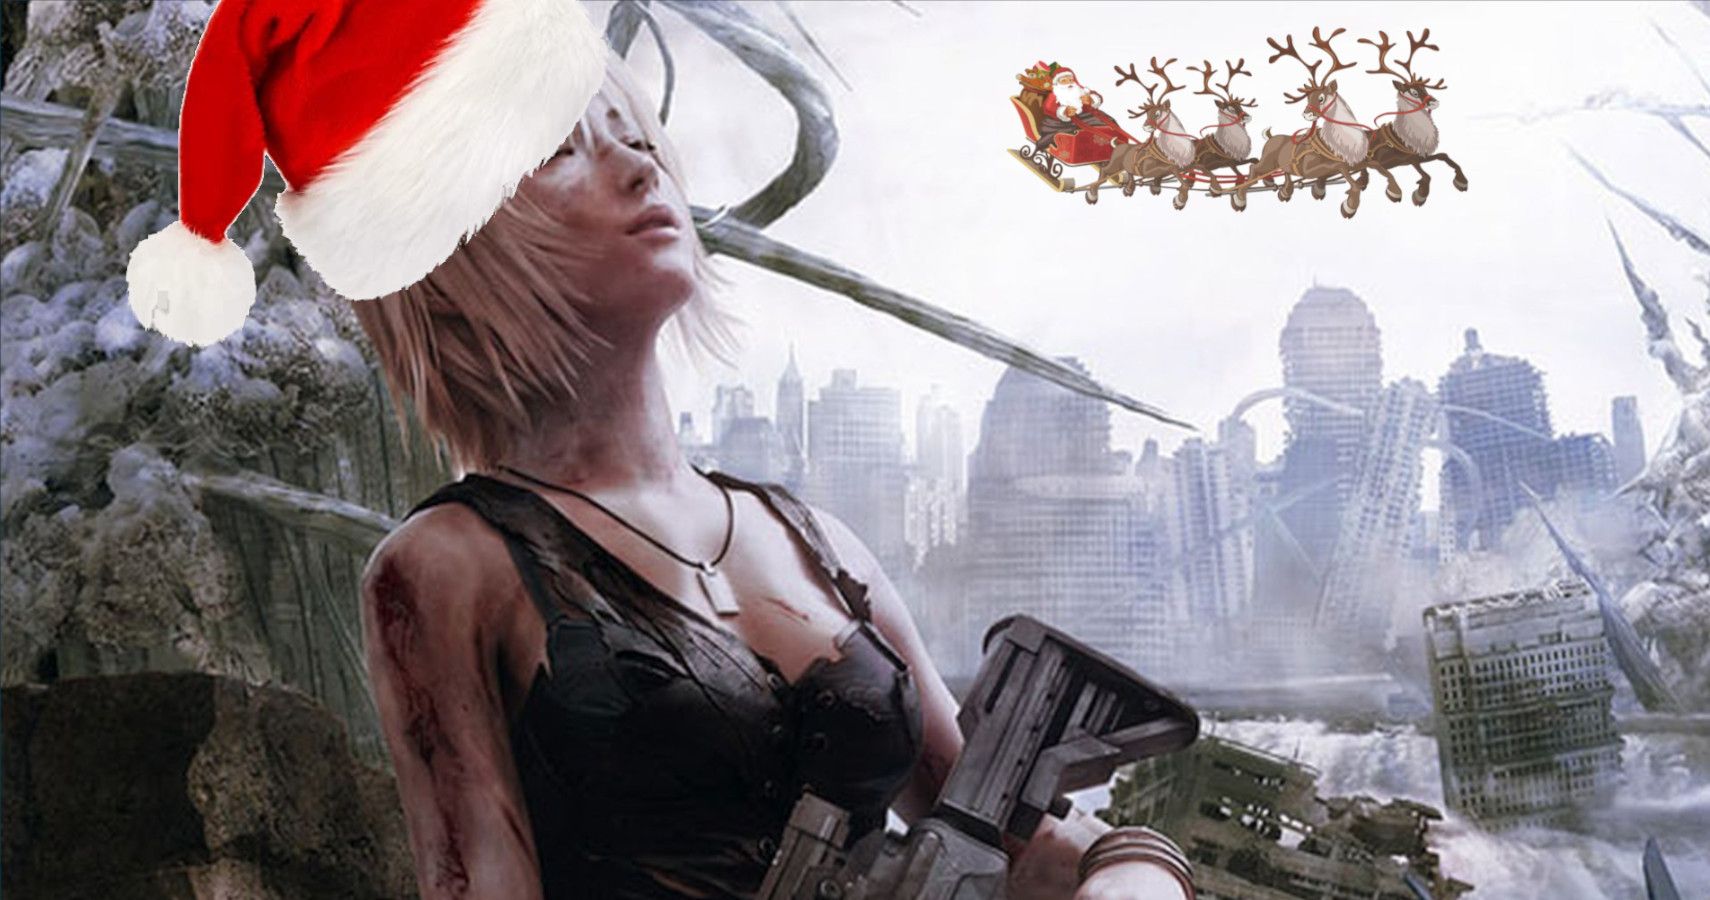 Parasite Eve, Holiday Tradition